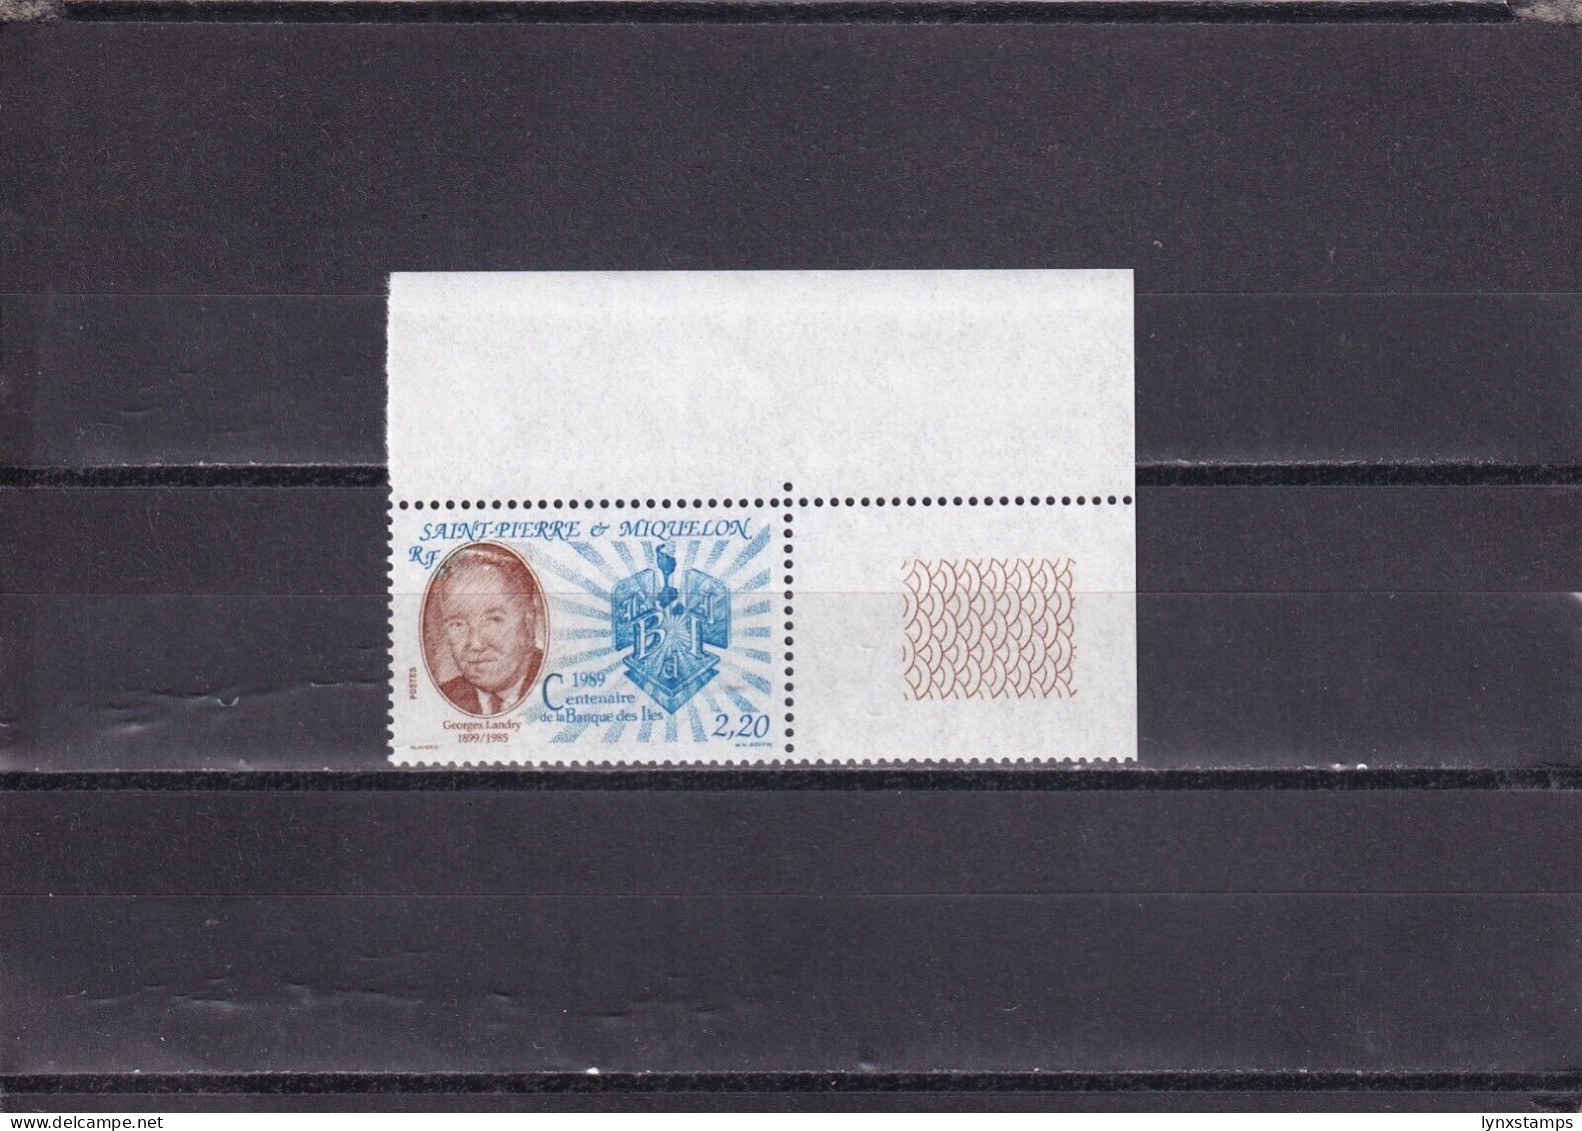 SA03 St Pierre Et Miquelon France 1989 100th Anniv Of Island Bank Mint Stamp - Unused Stamps